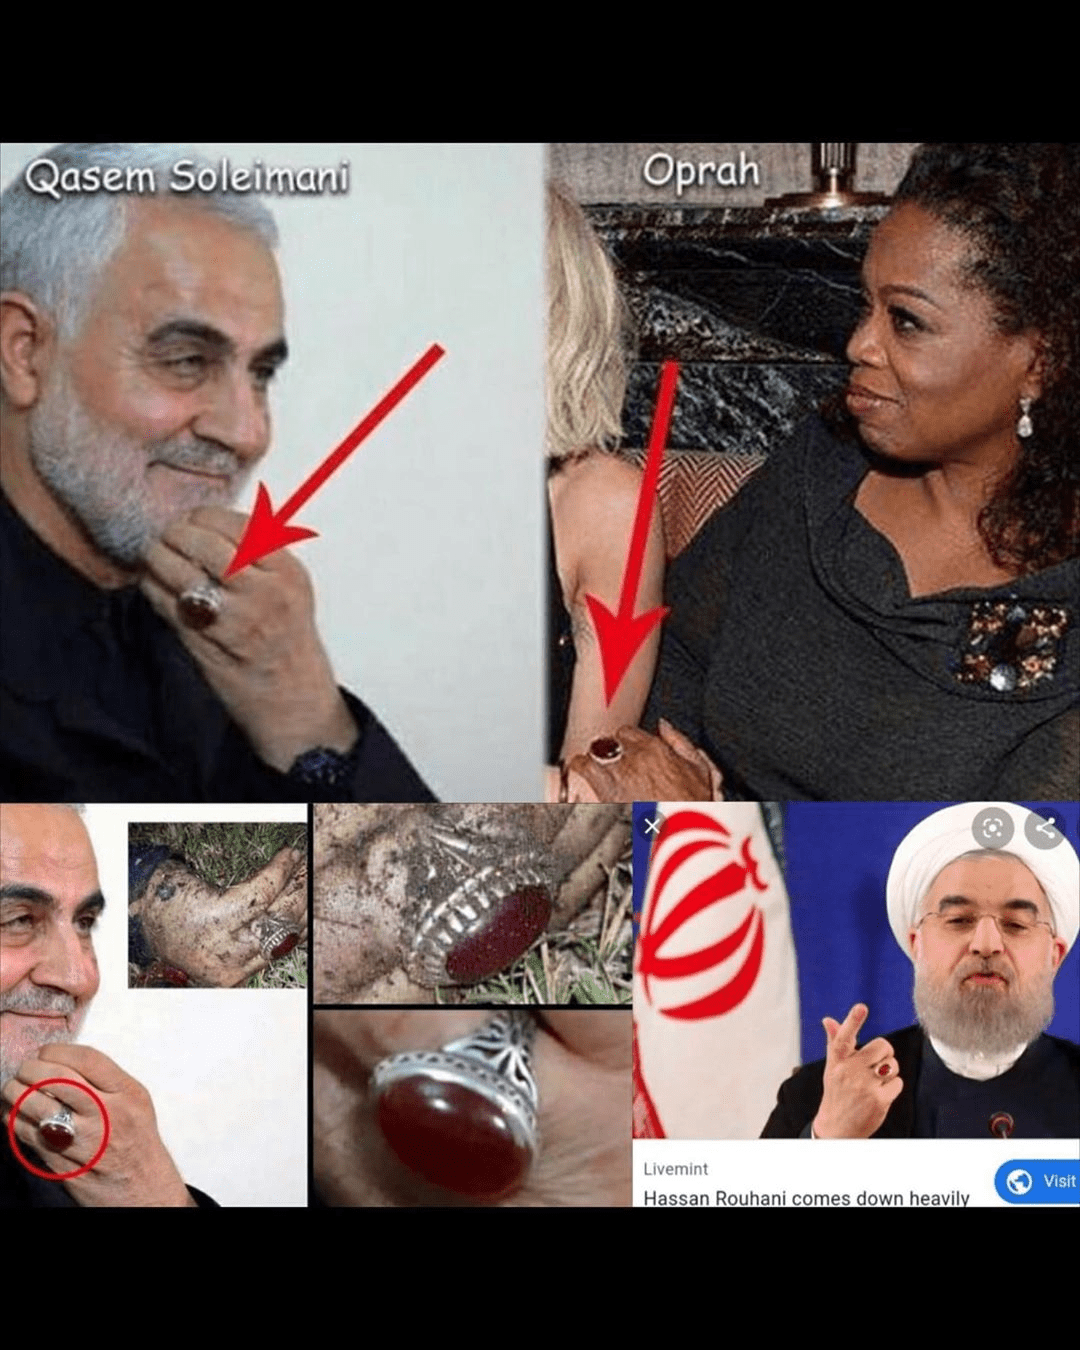 Why Are These Celebrities Wearing The Same Occult Ring - Qasem Solemaini, Oprah, Hassan Rouhani